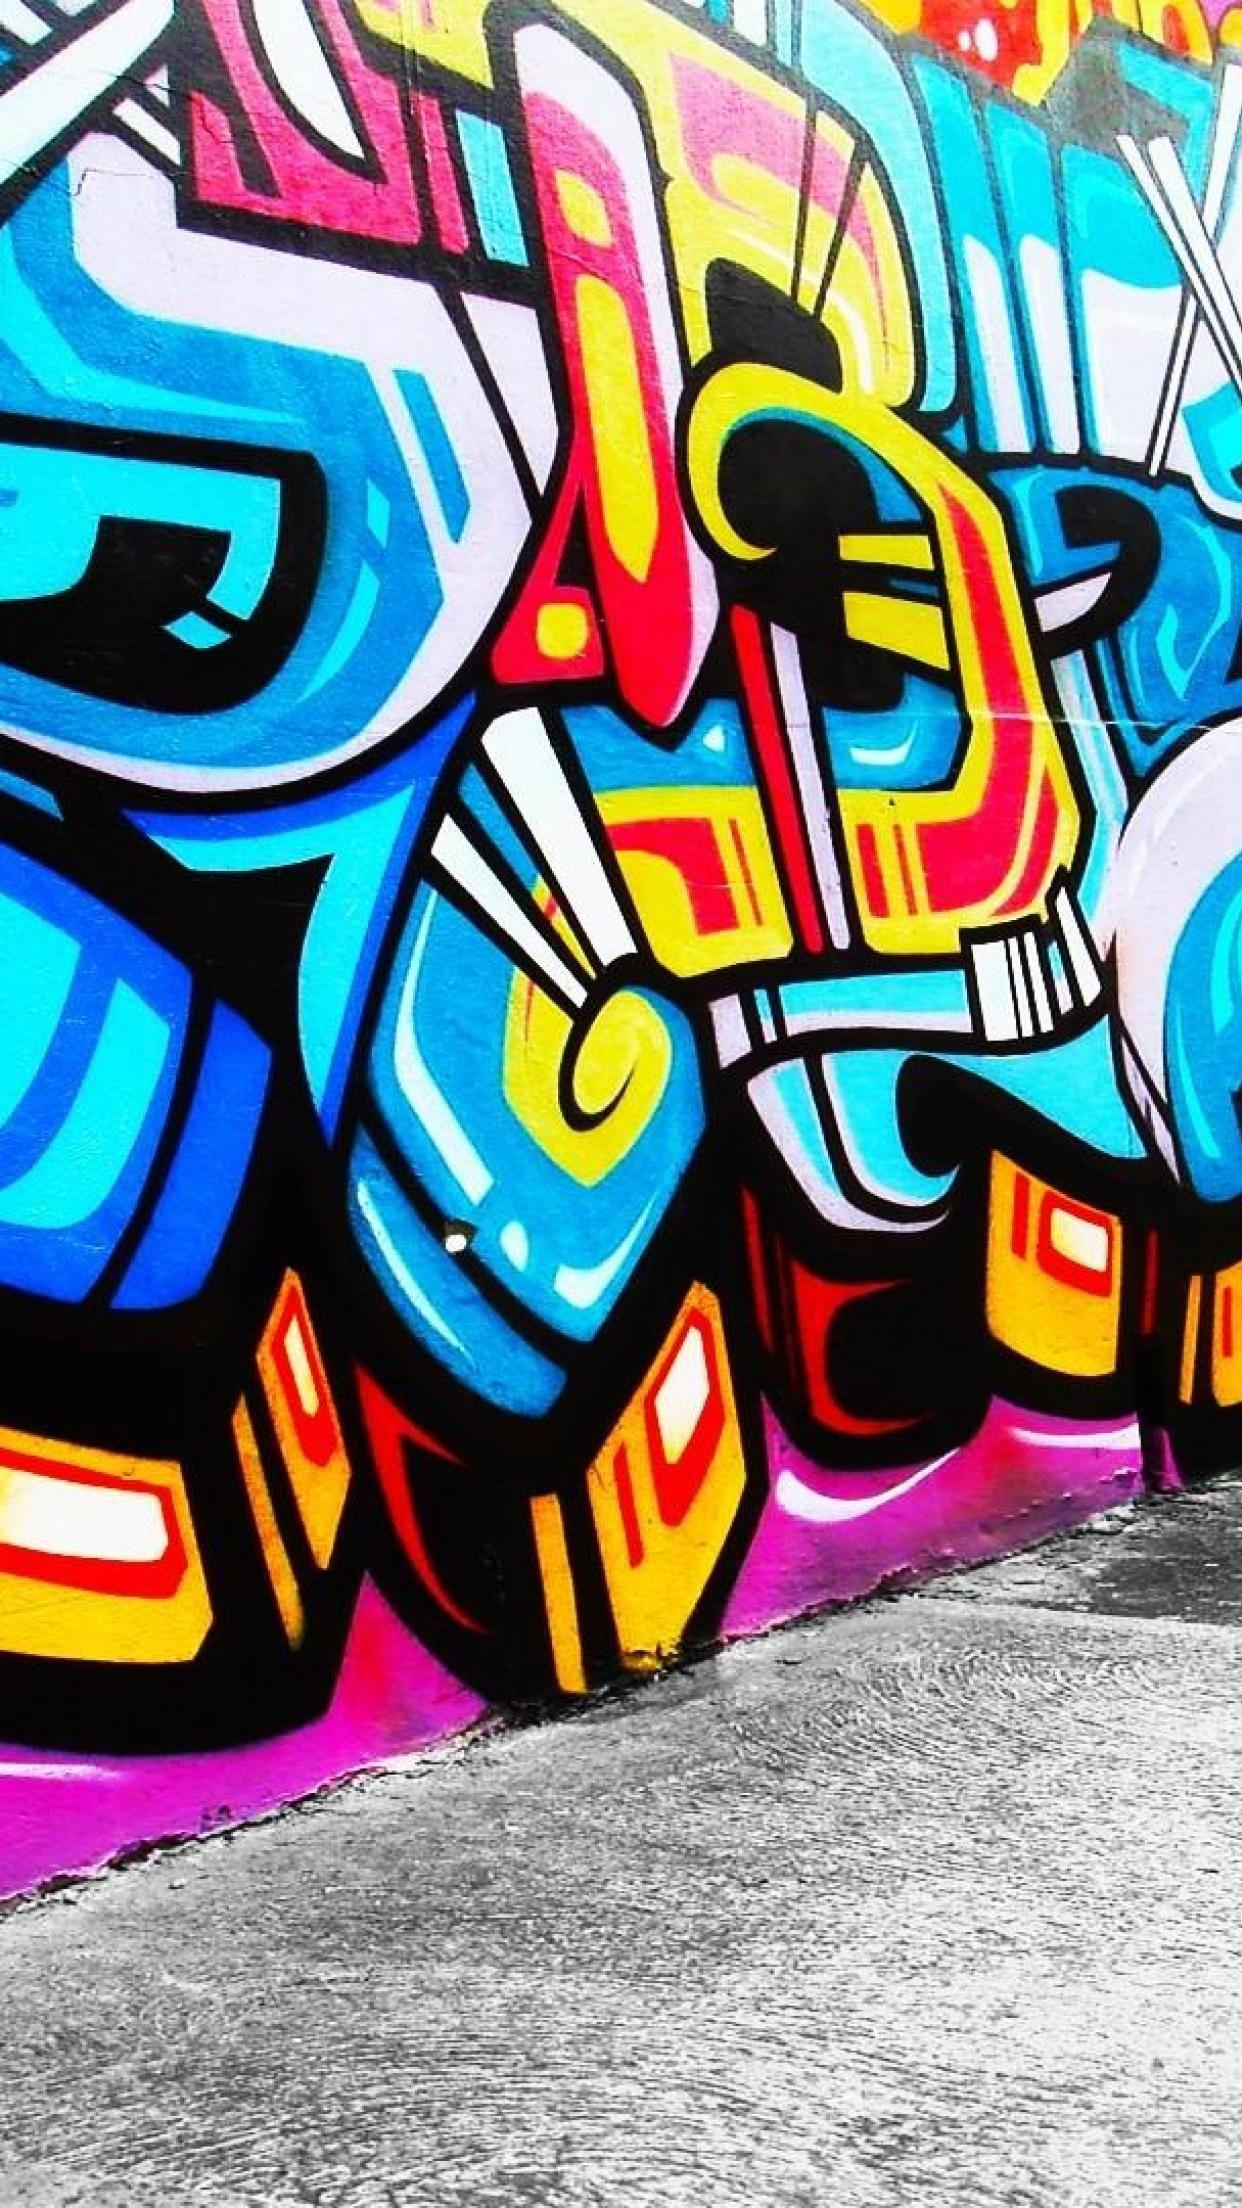 Graffiti Wallpapers For Mobile Wallpaper Cave Tons of awesome hd graffiti wallpapers to download for free. graffiti wallpapers for mobile